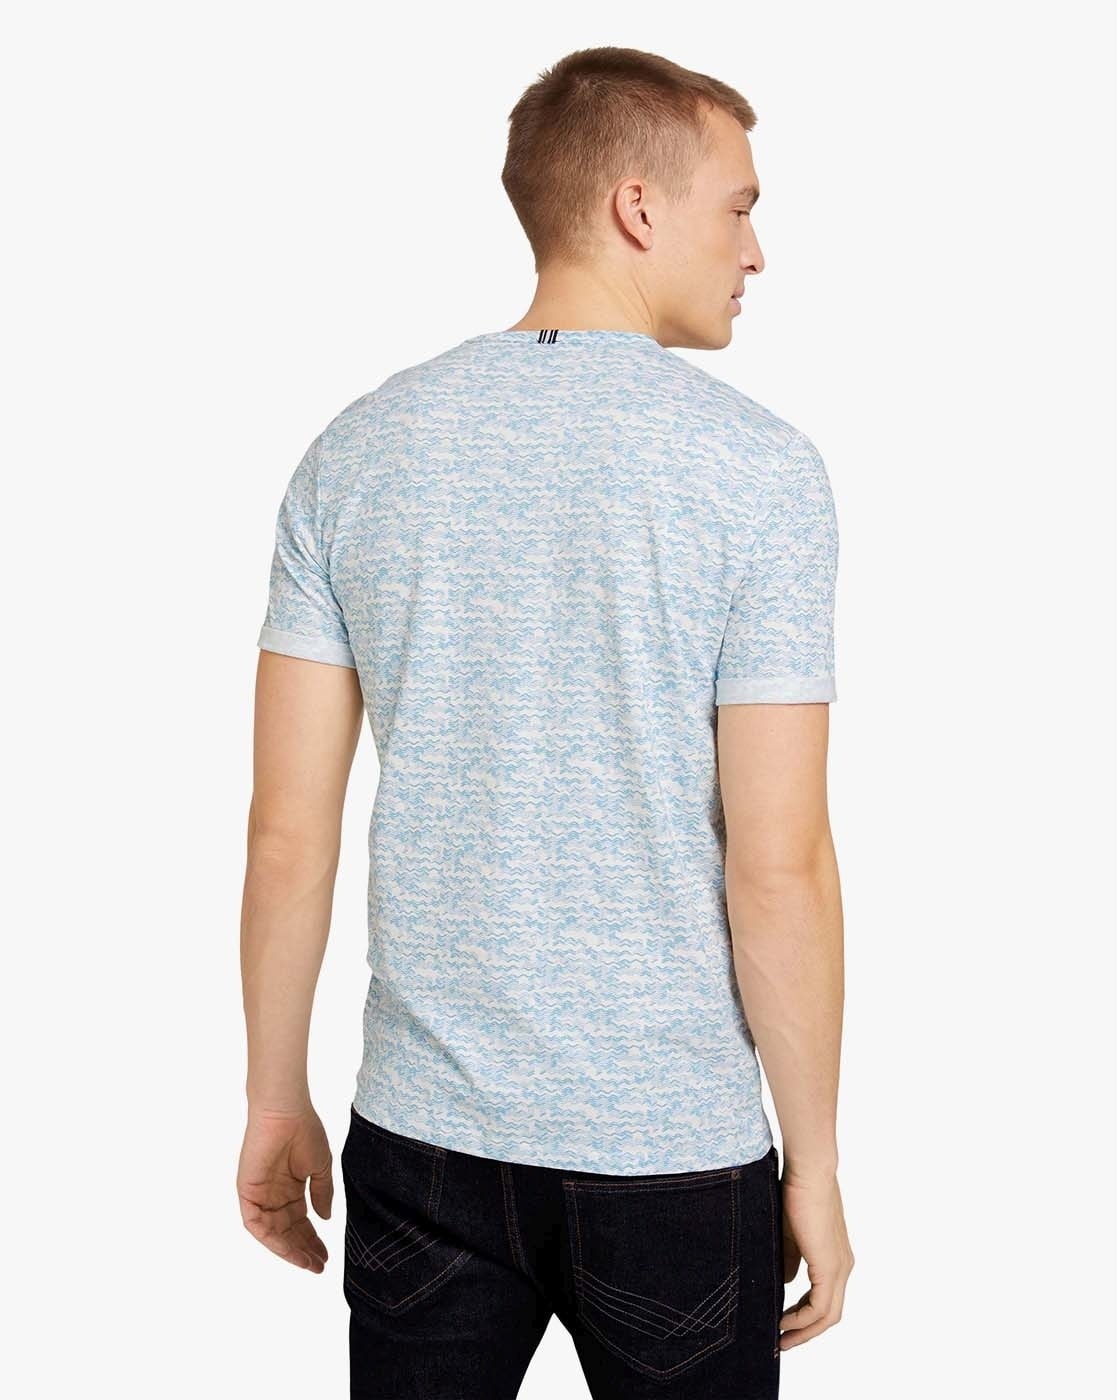 Buy Blue Tshirts for Men Tom Tailor by Online